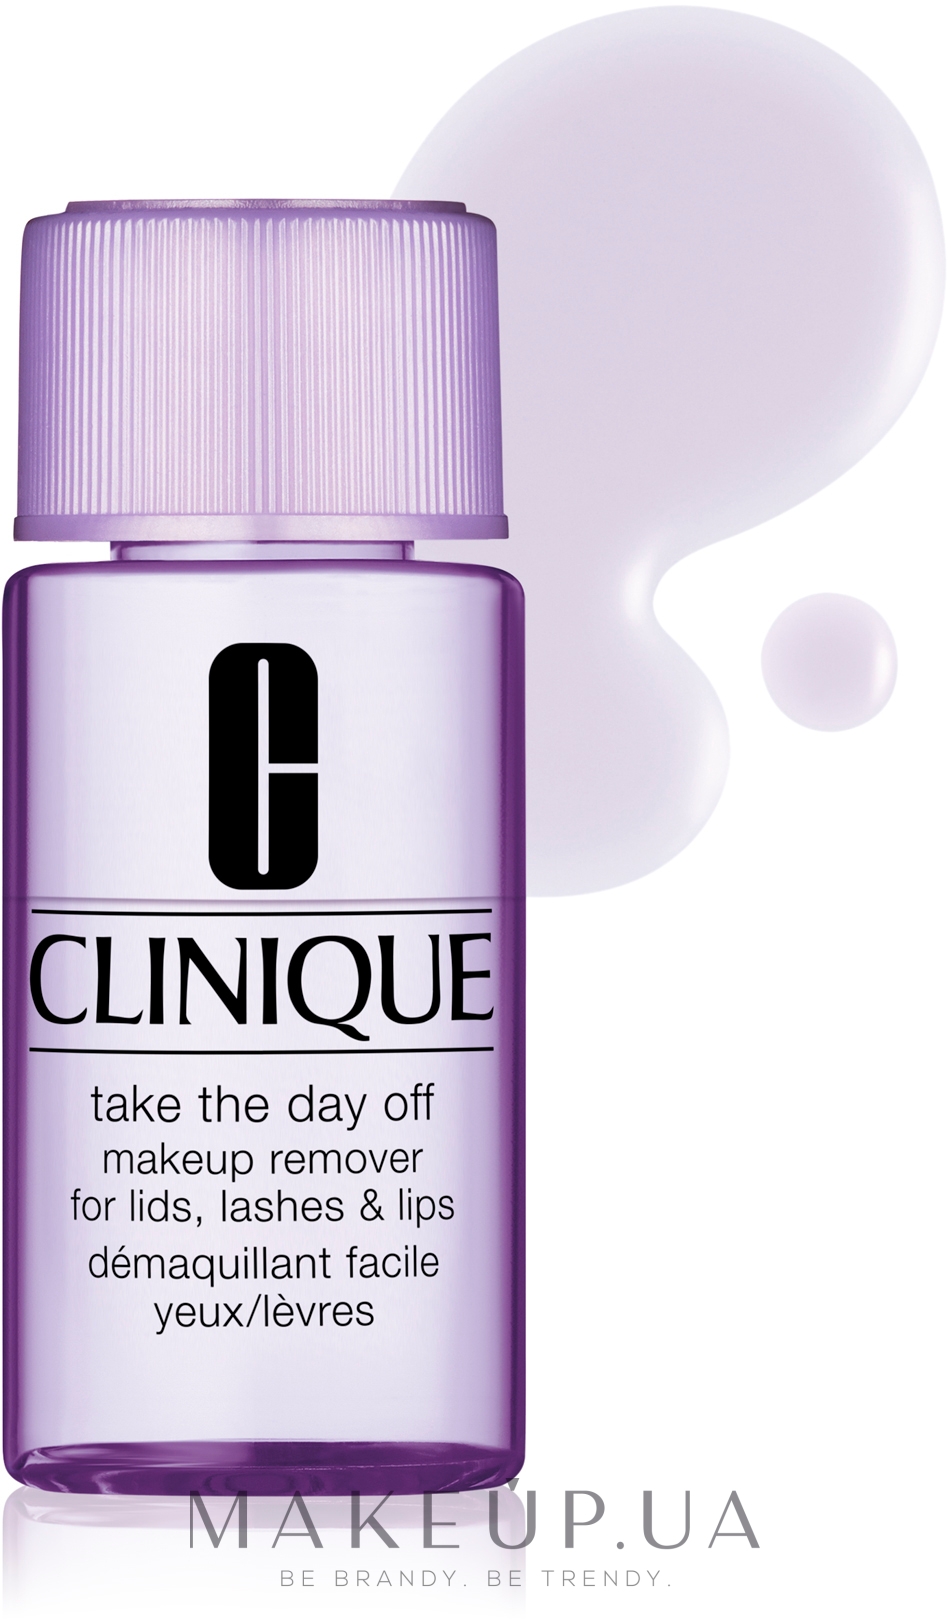 Clinique Take The Day Off Makeup Remover For Lids Lashes And Lips ПОДАРУНОК Засіб для зняття